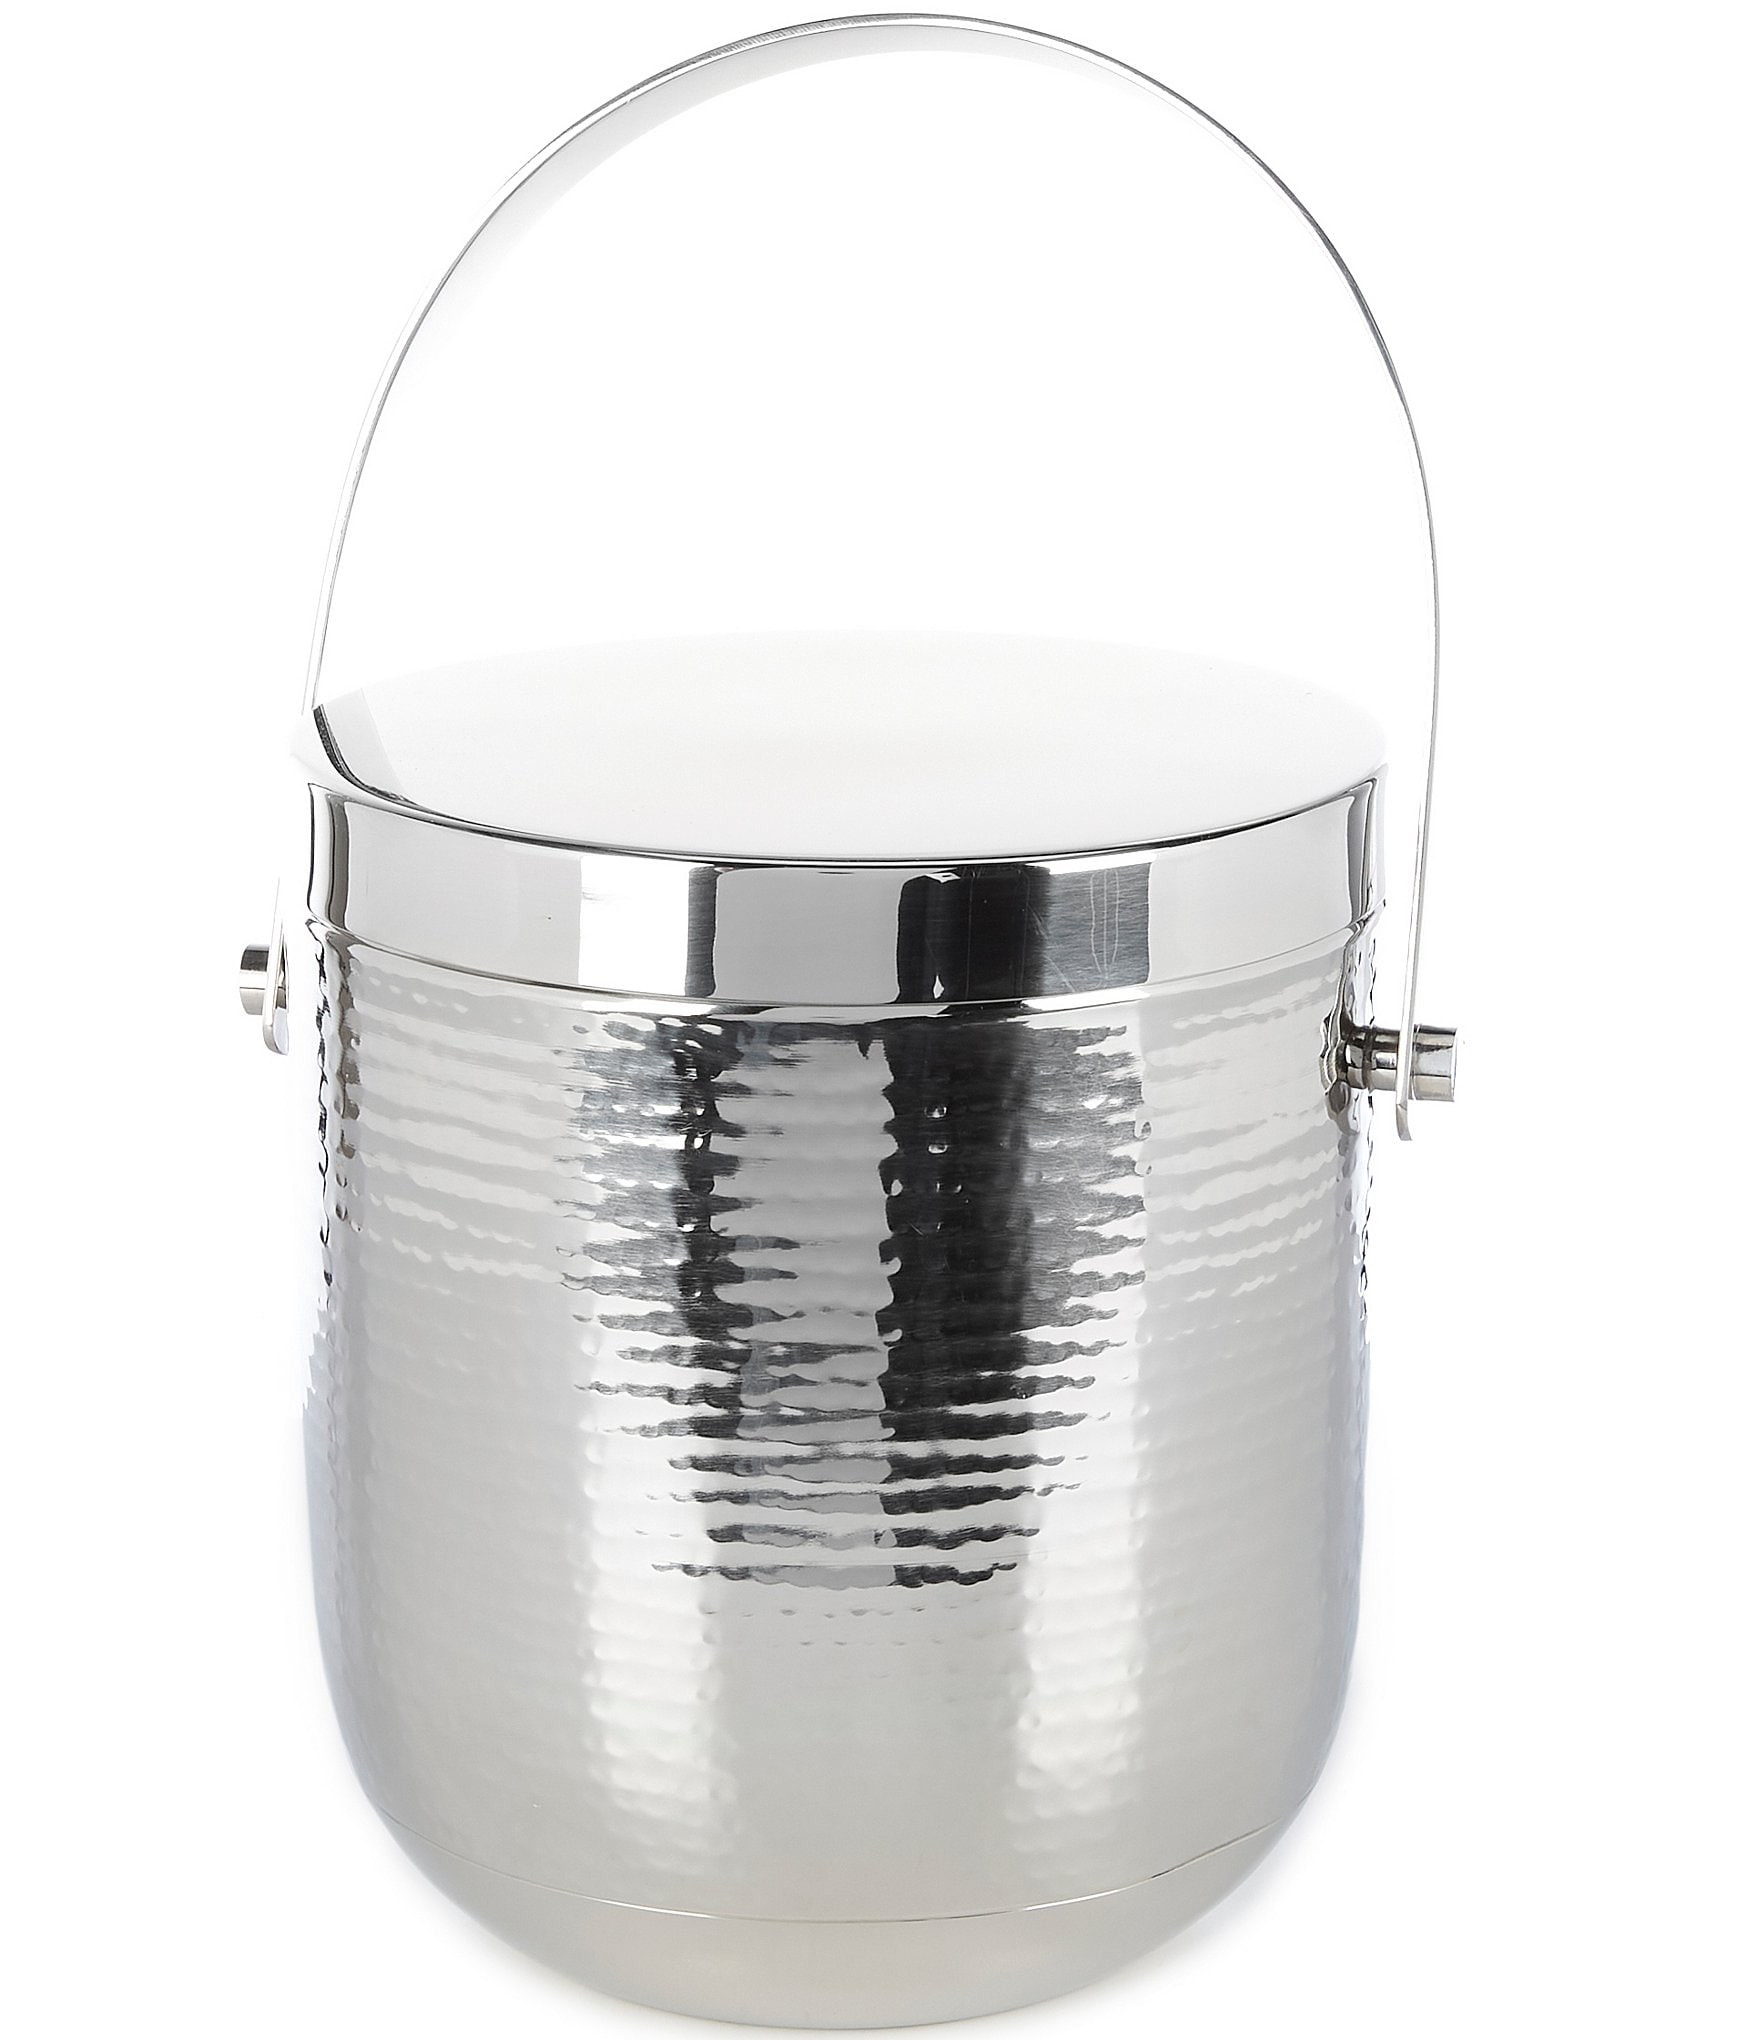 Hammered Metal Ice Bucket with Ice Scoop - Threshold 1 ct